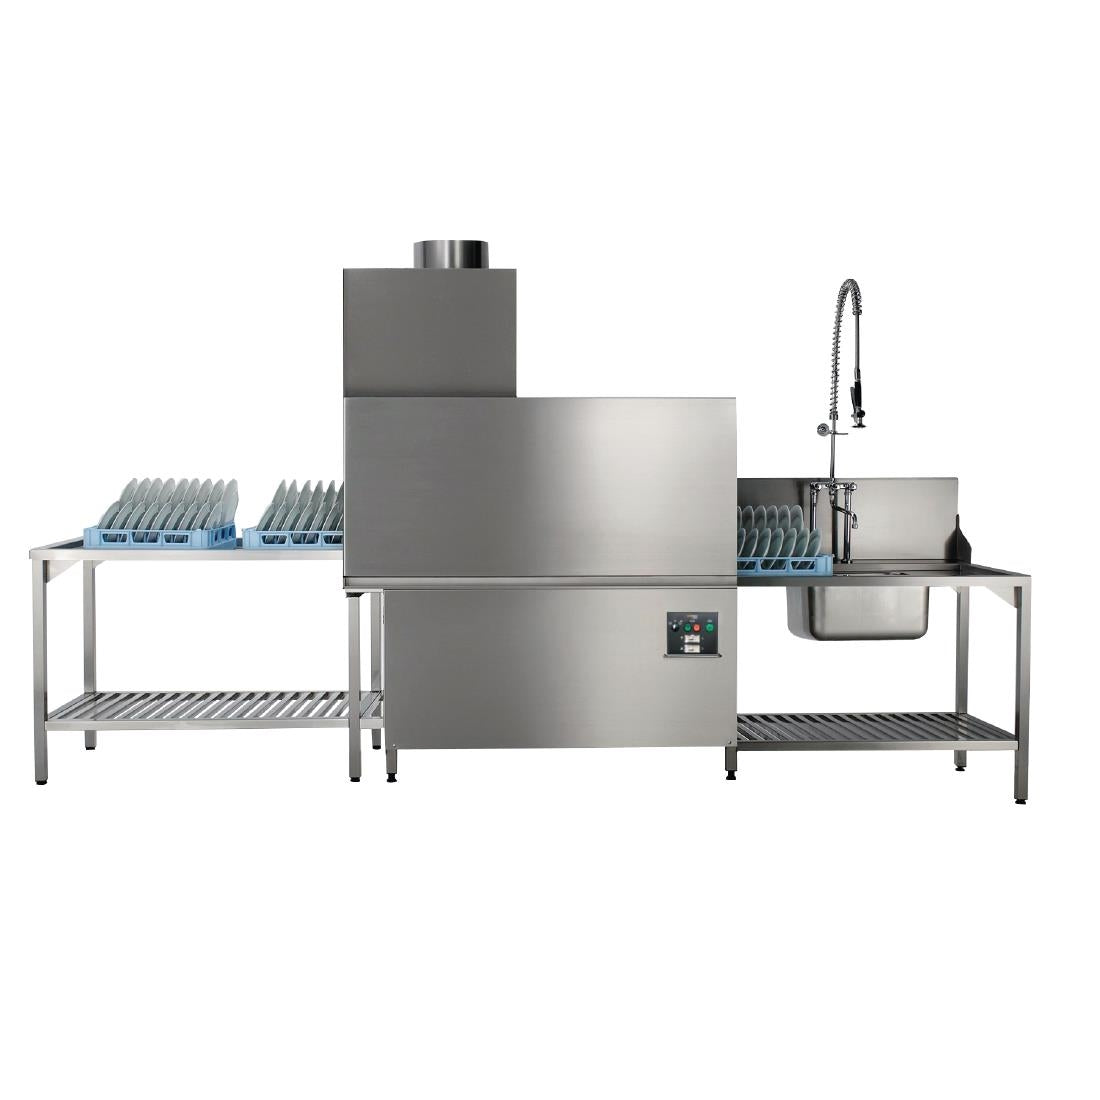 Hobart Ecomax Plus Conveyor Dishwasher Cold Feed C815-A JD Catering Equipment Solutions Ltd